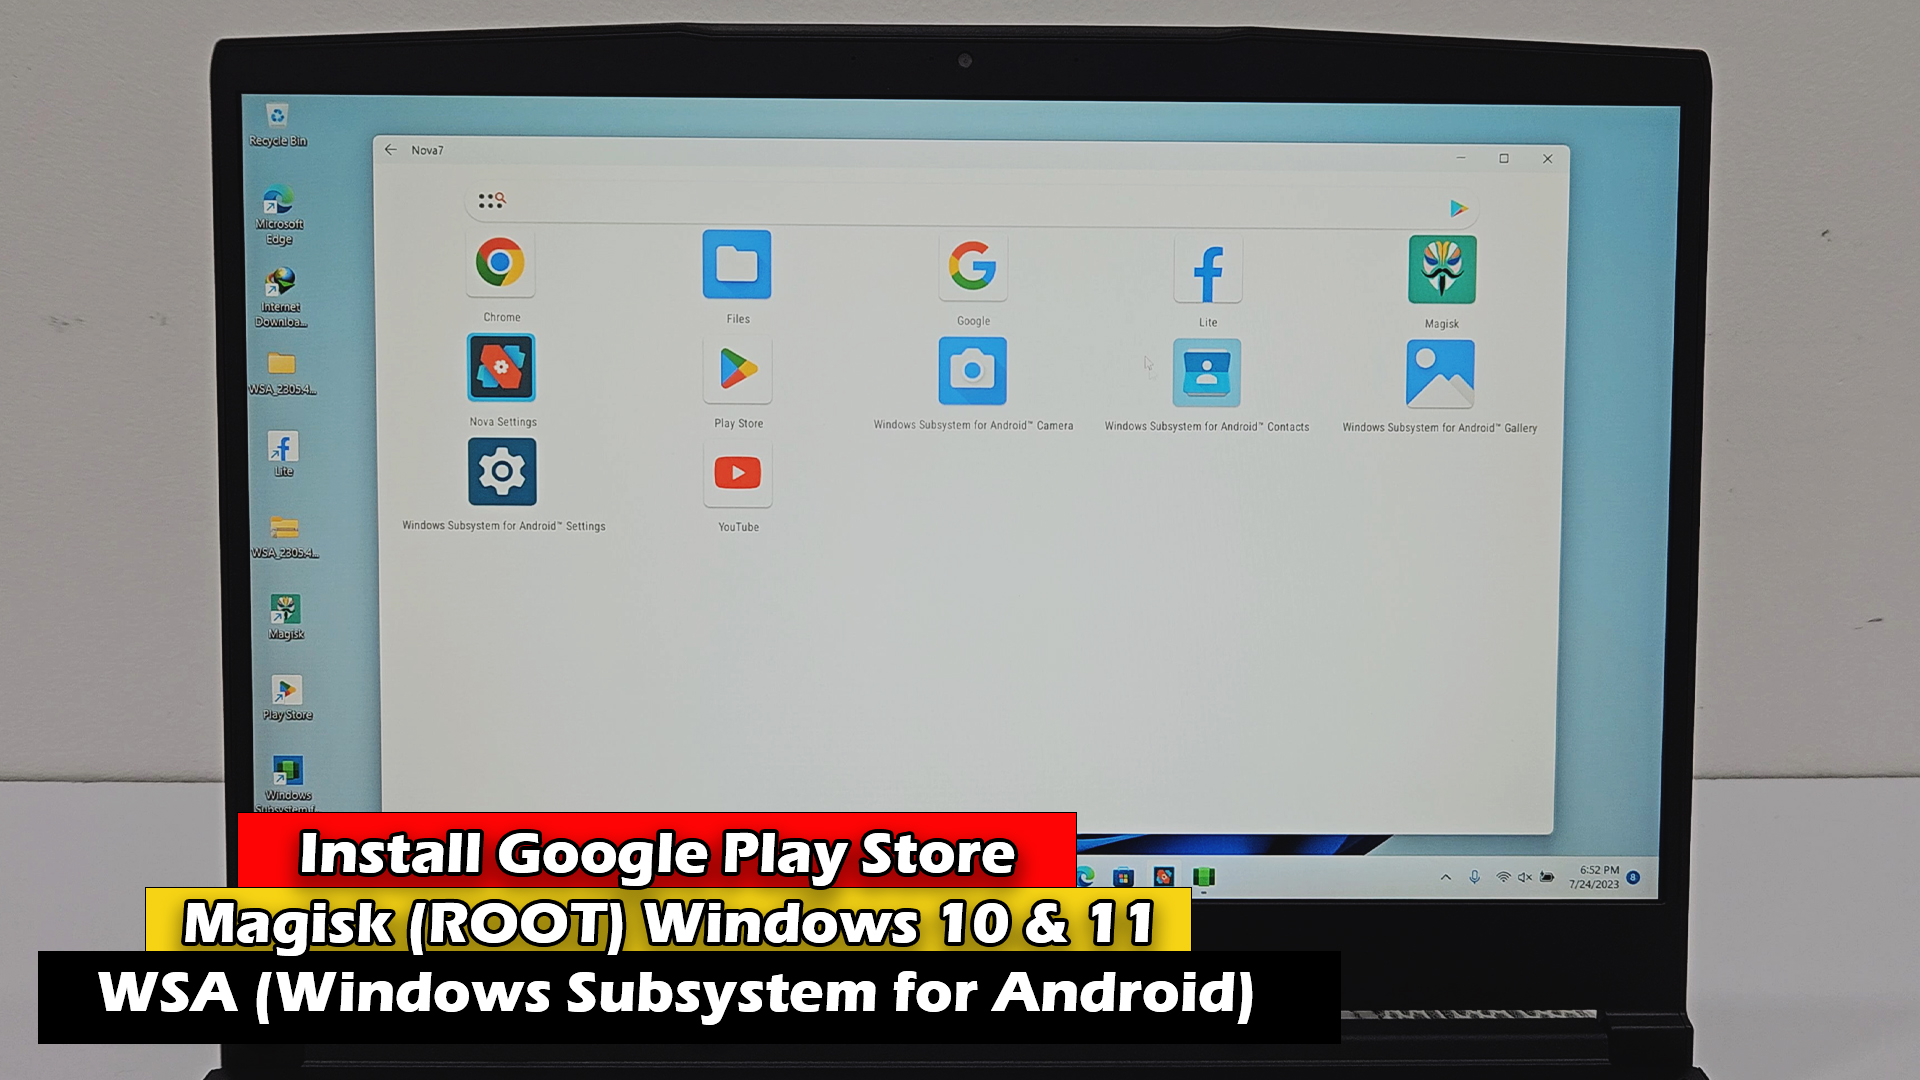 Install Google Play Store Magisk (ROOT) in Windows 10 11 WSA